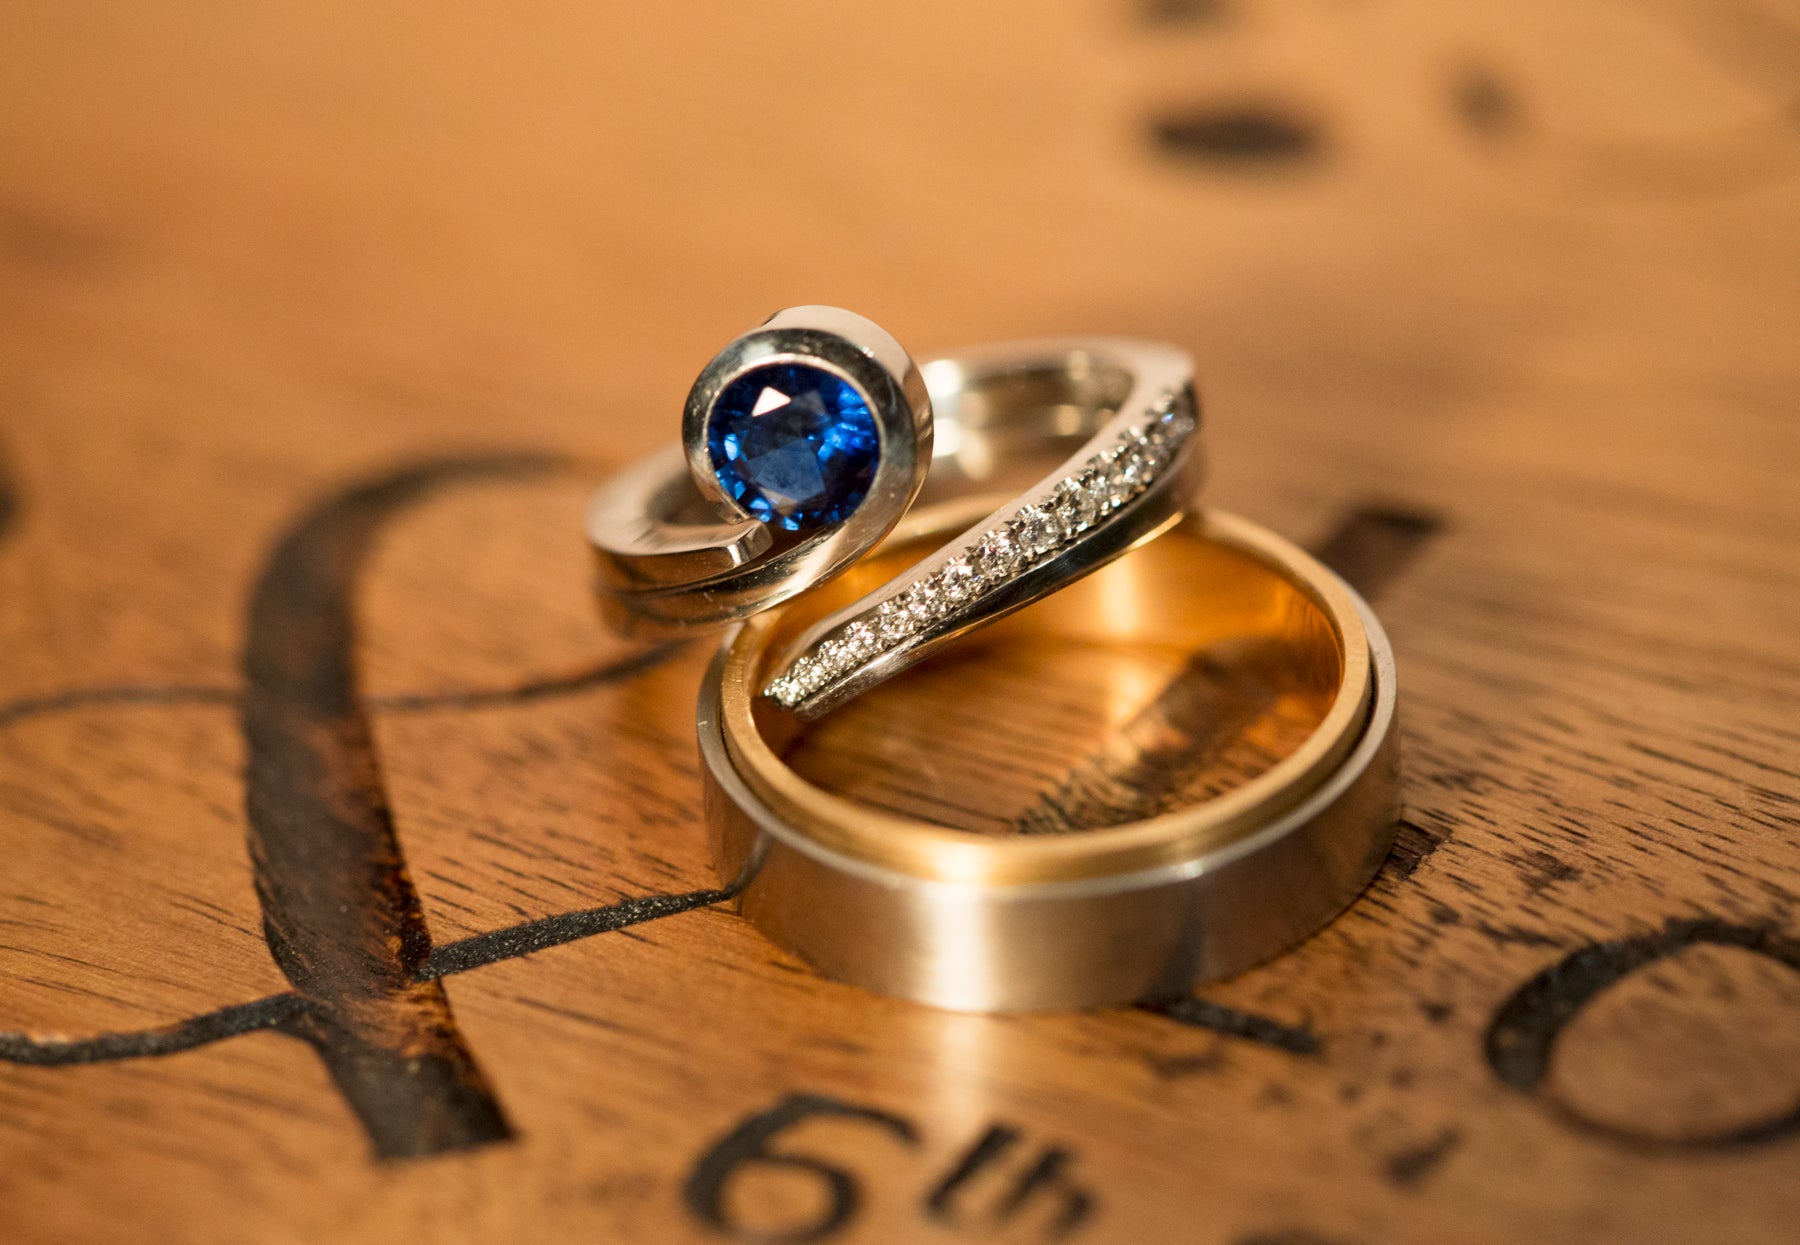 Sapphire, platinum and diamond engagement ring and wedding rings